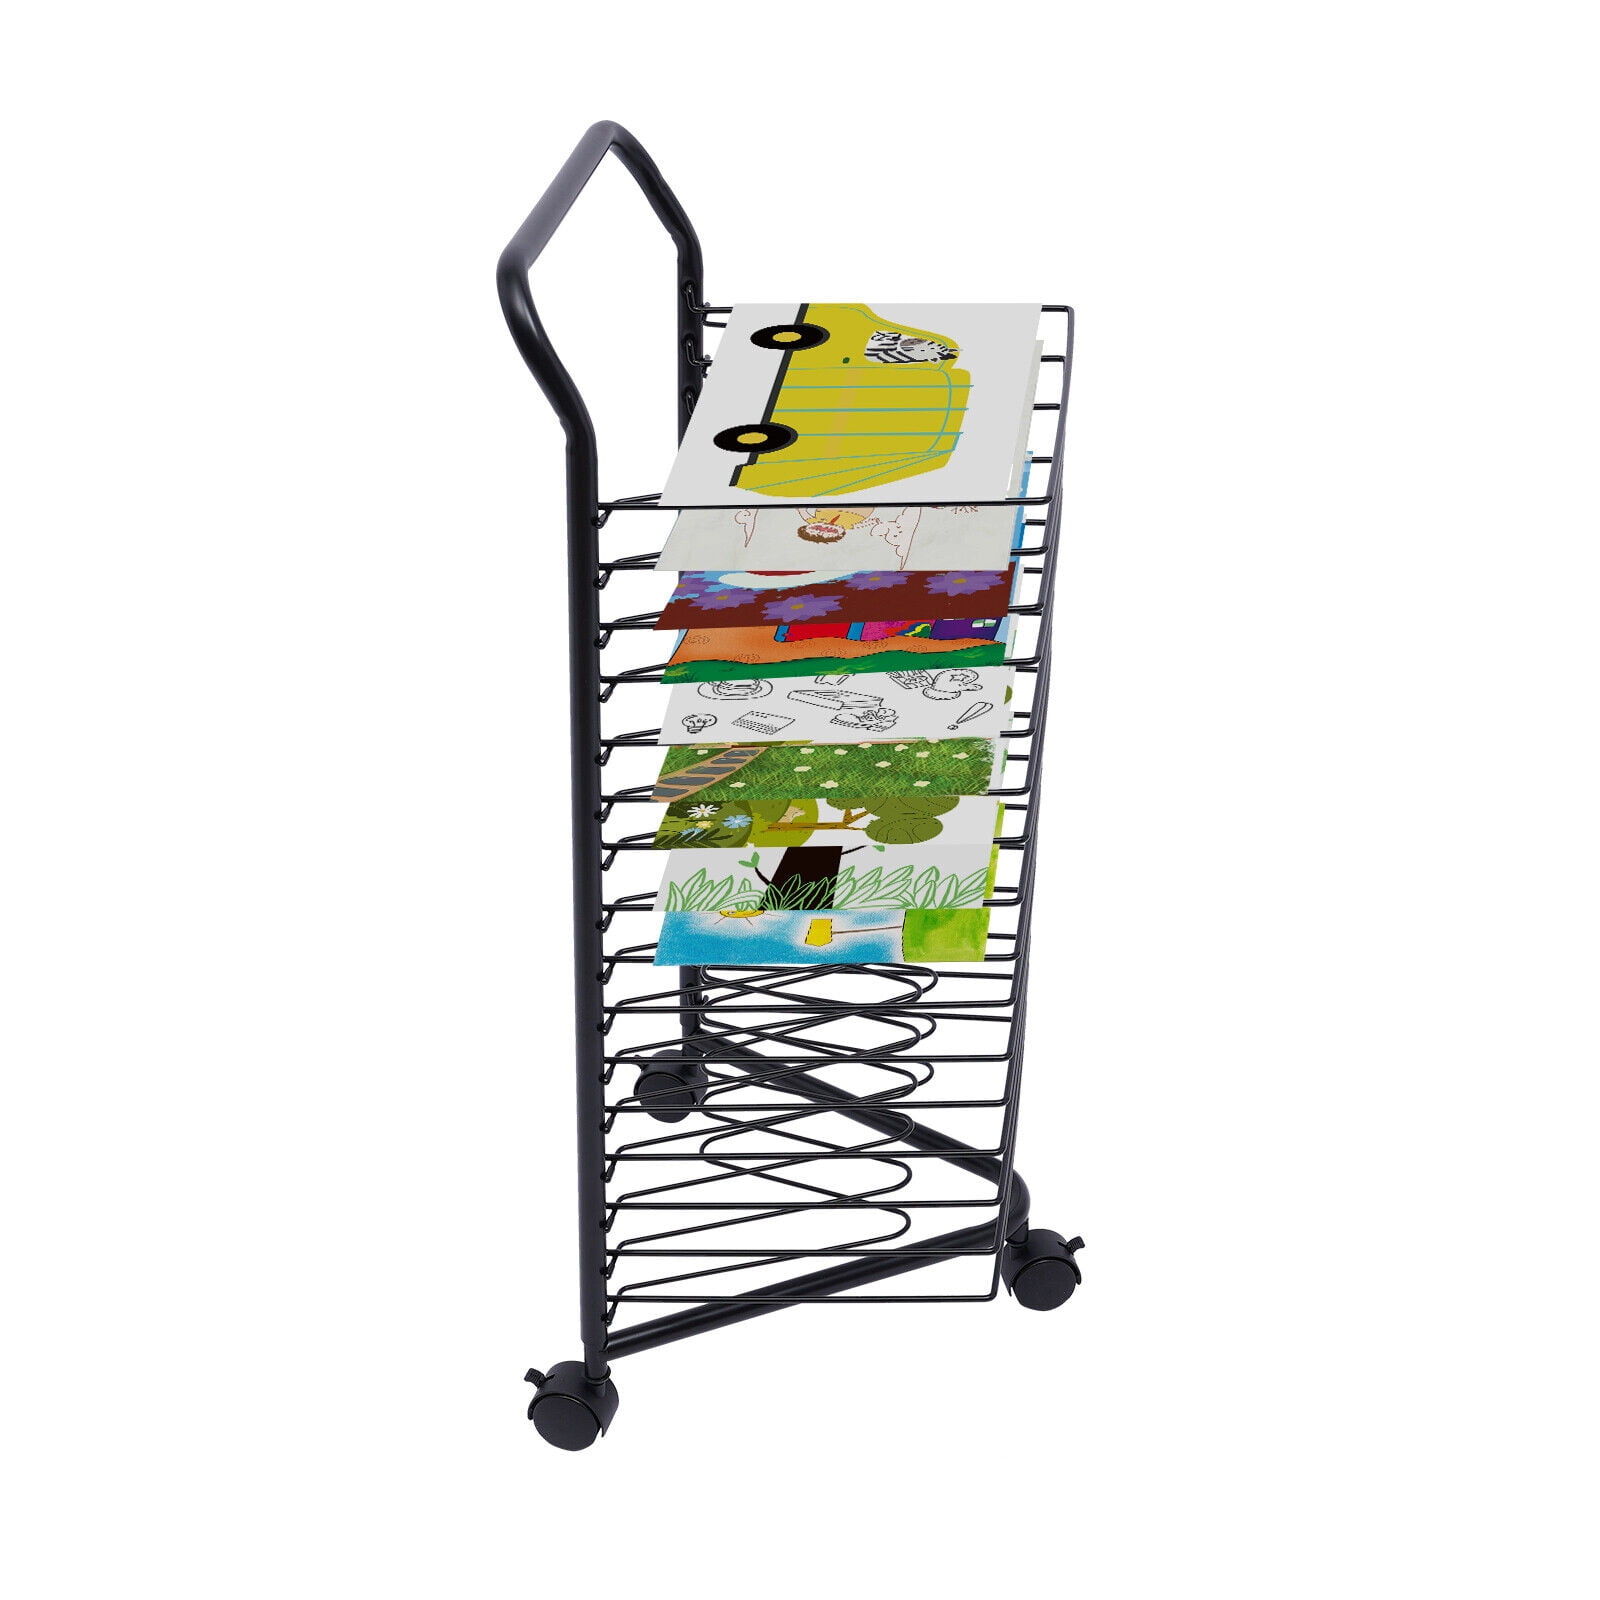 Metal Artwork Storage Display Rack Art Drying Rack - Sturdy Art Organizer  for Paintings and Drawings for Schools and Art Clubs - 16 Shelves - Steel